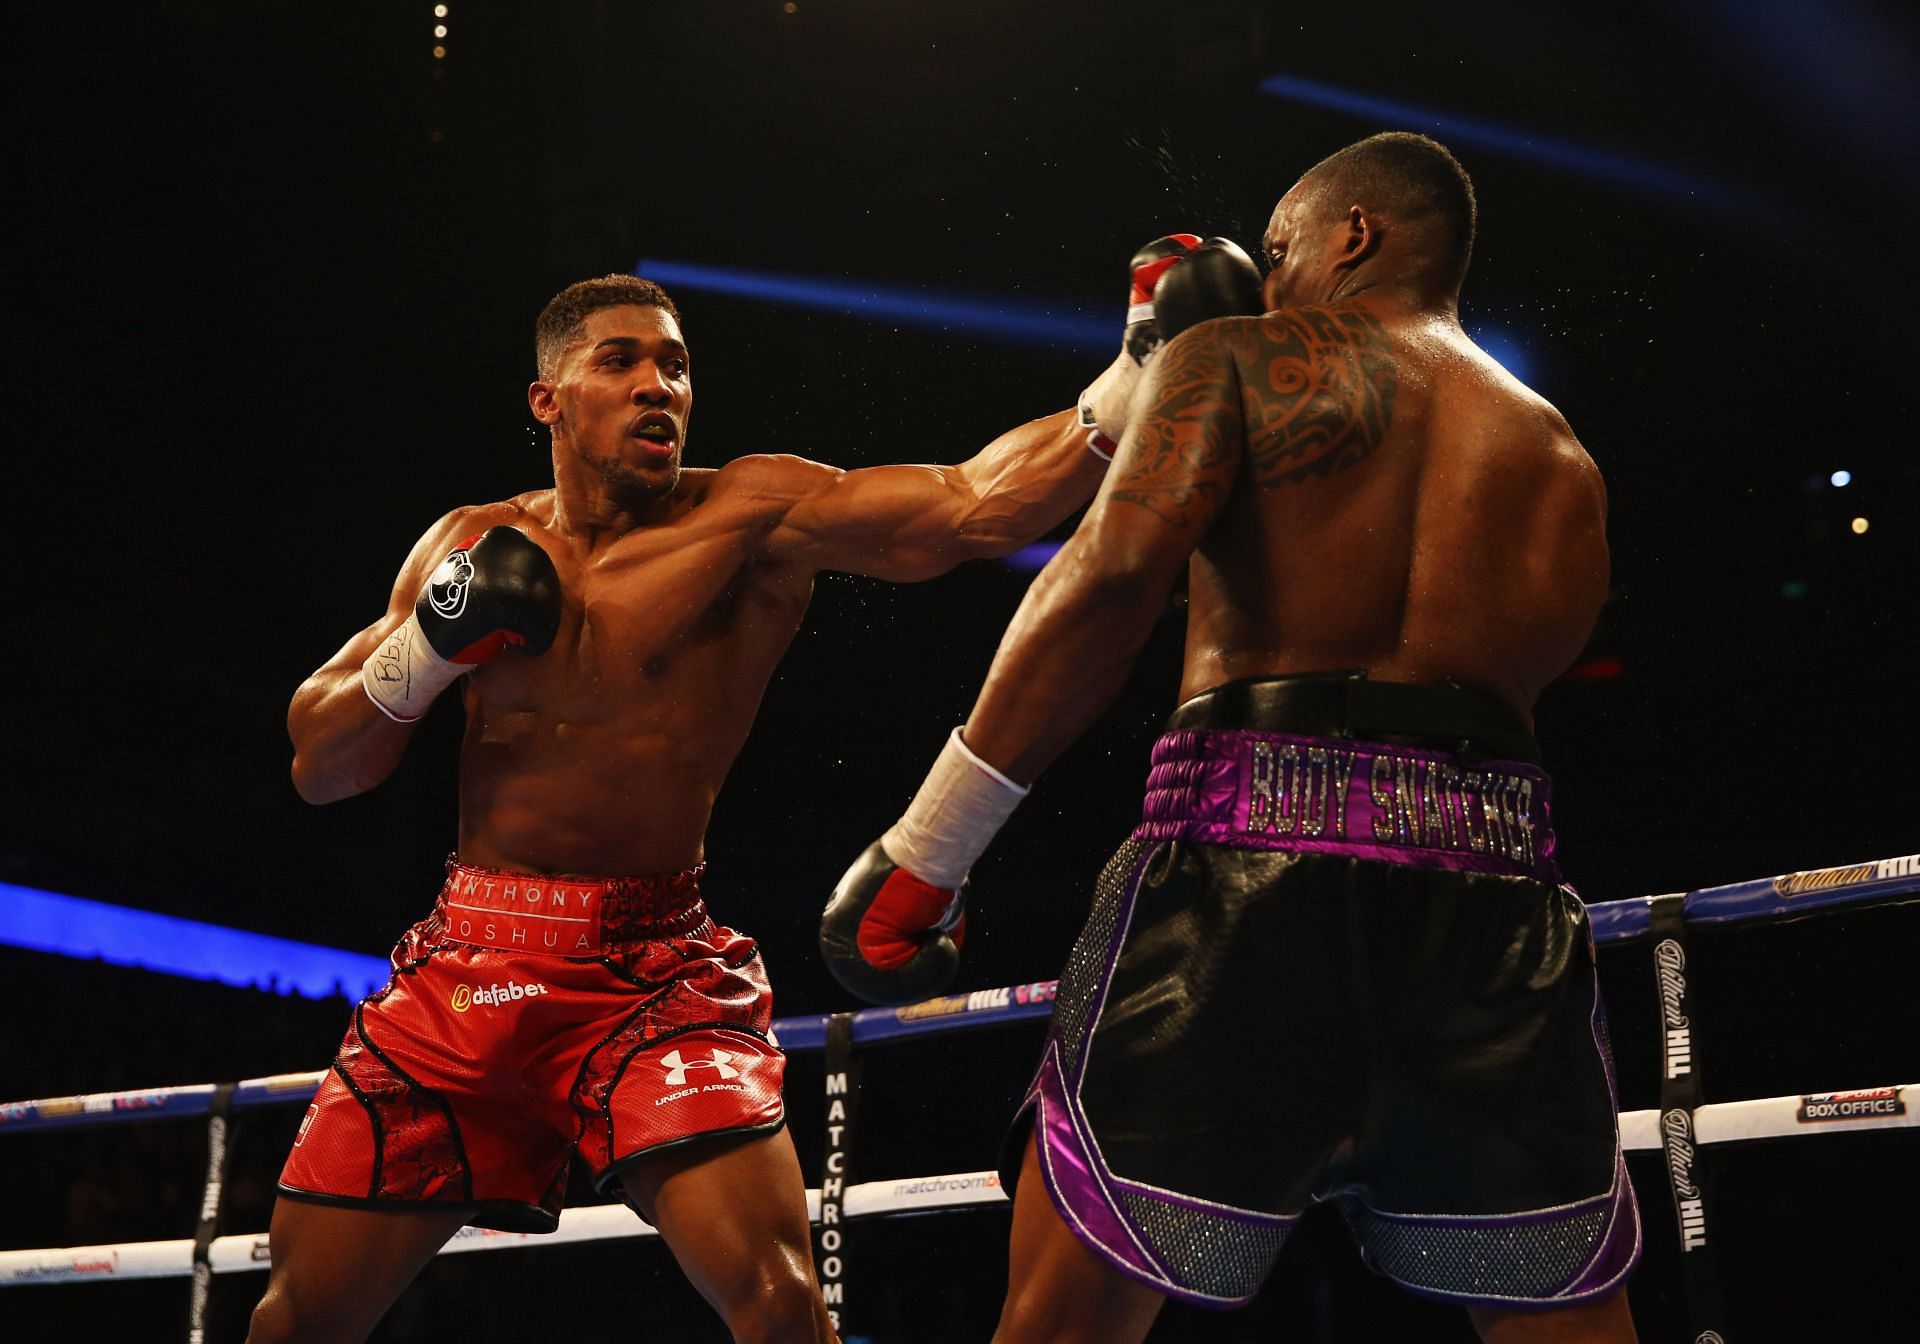 Anthony Joshua (left) and Dillian Whyte (right) during the British and Commonwealth Heavyweight Title contest at The O2 Arena on December 12, 2015, in London, England. (Photo by Richard Heathcote/Getty Images)